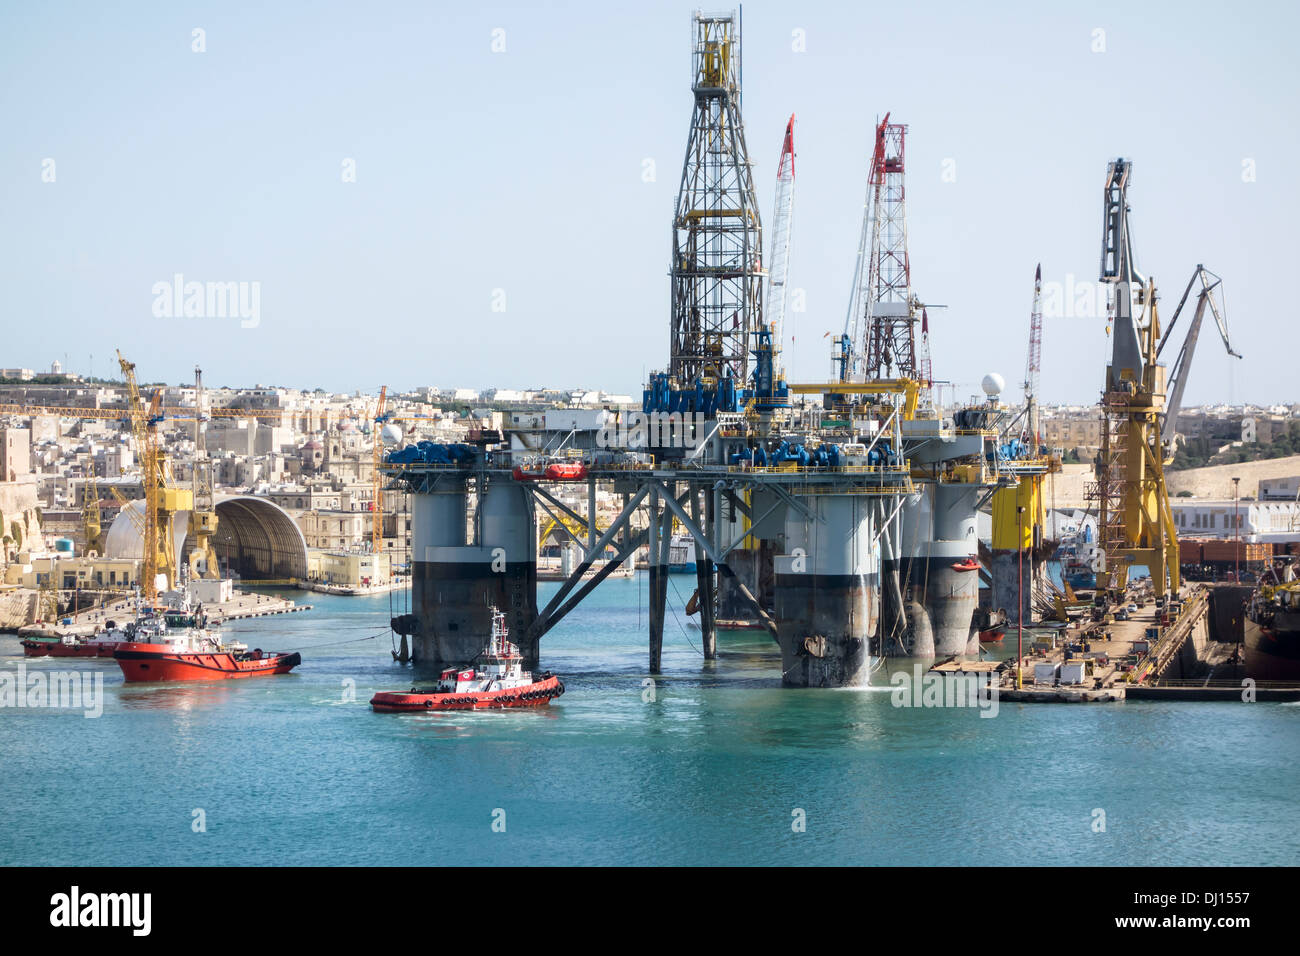 The sights of, overlooking, around and on the Island of Malta: Republic of Malta, Maltese Mediterranean Sea Europe oil gas rig Stock Photo